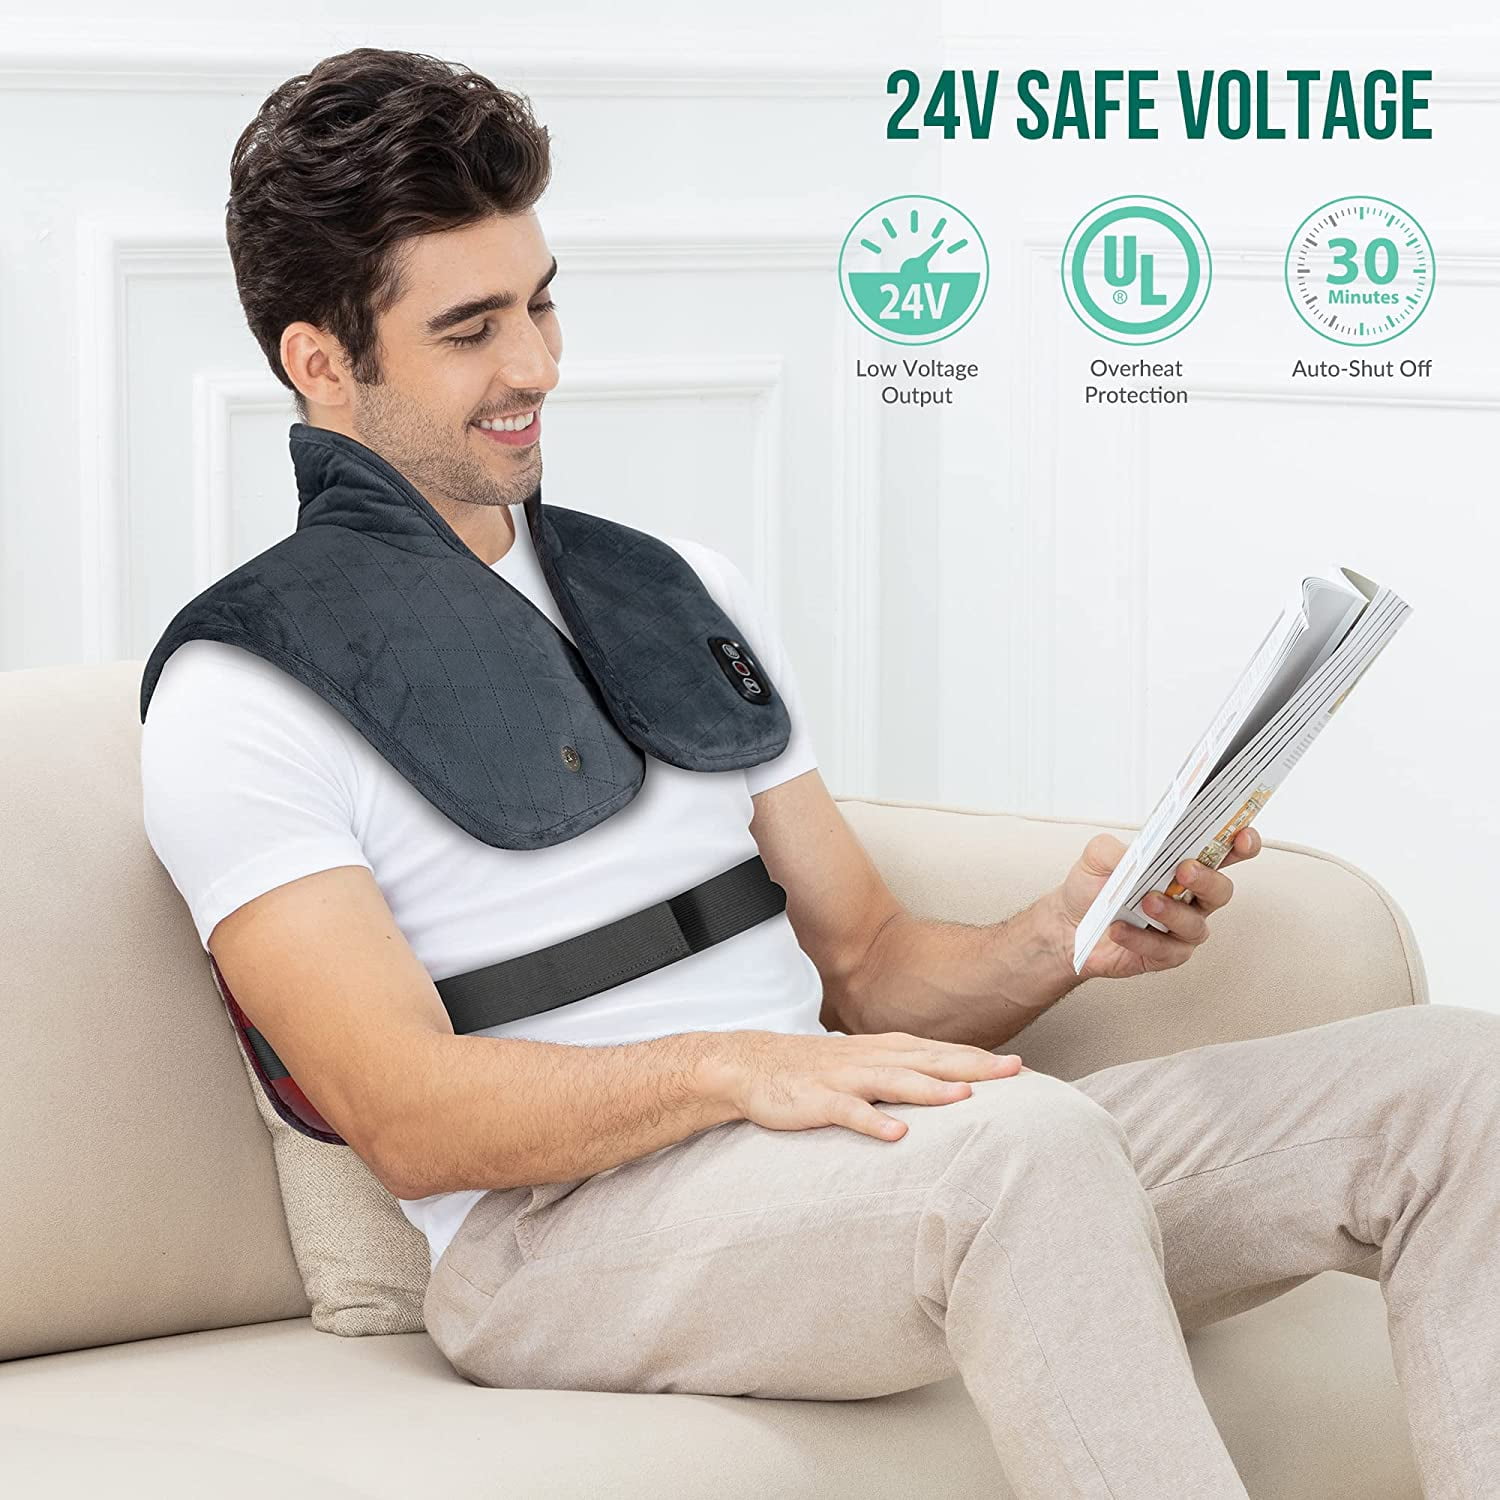 Snailax Heating Pad for Back Pain Relief, Vibrating Back Massager with Heat - 6213